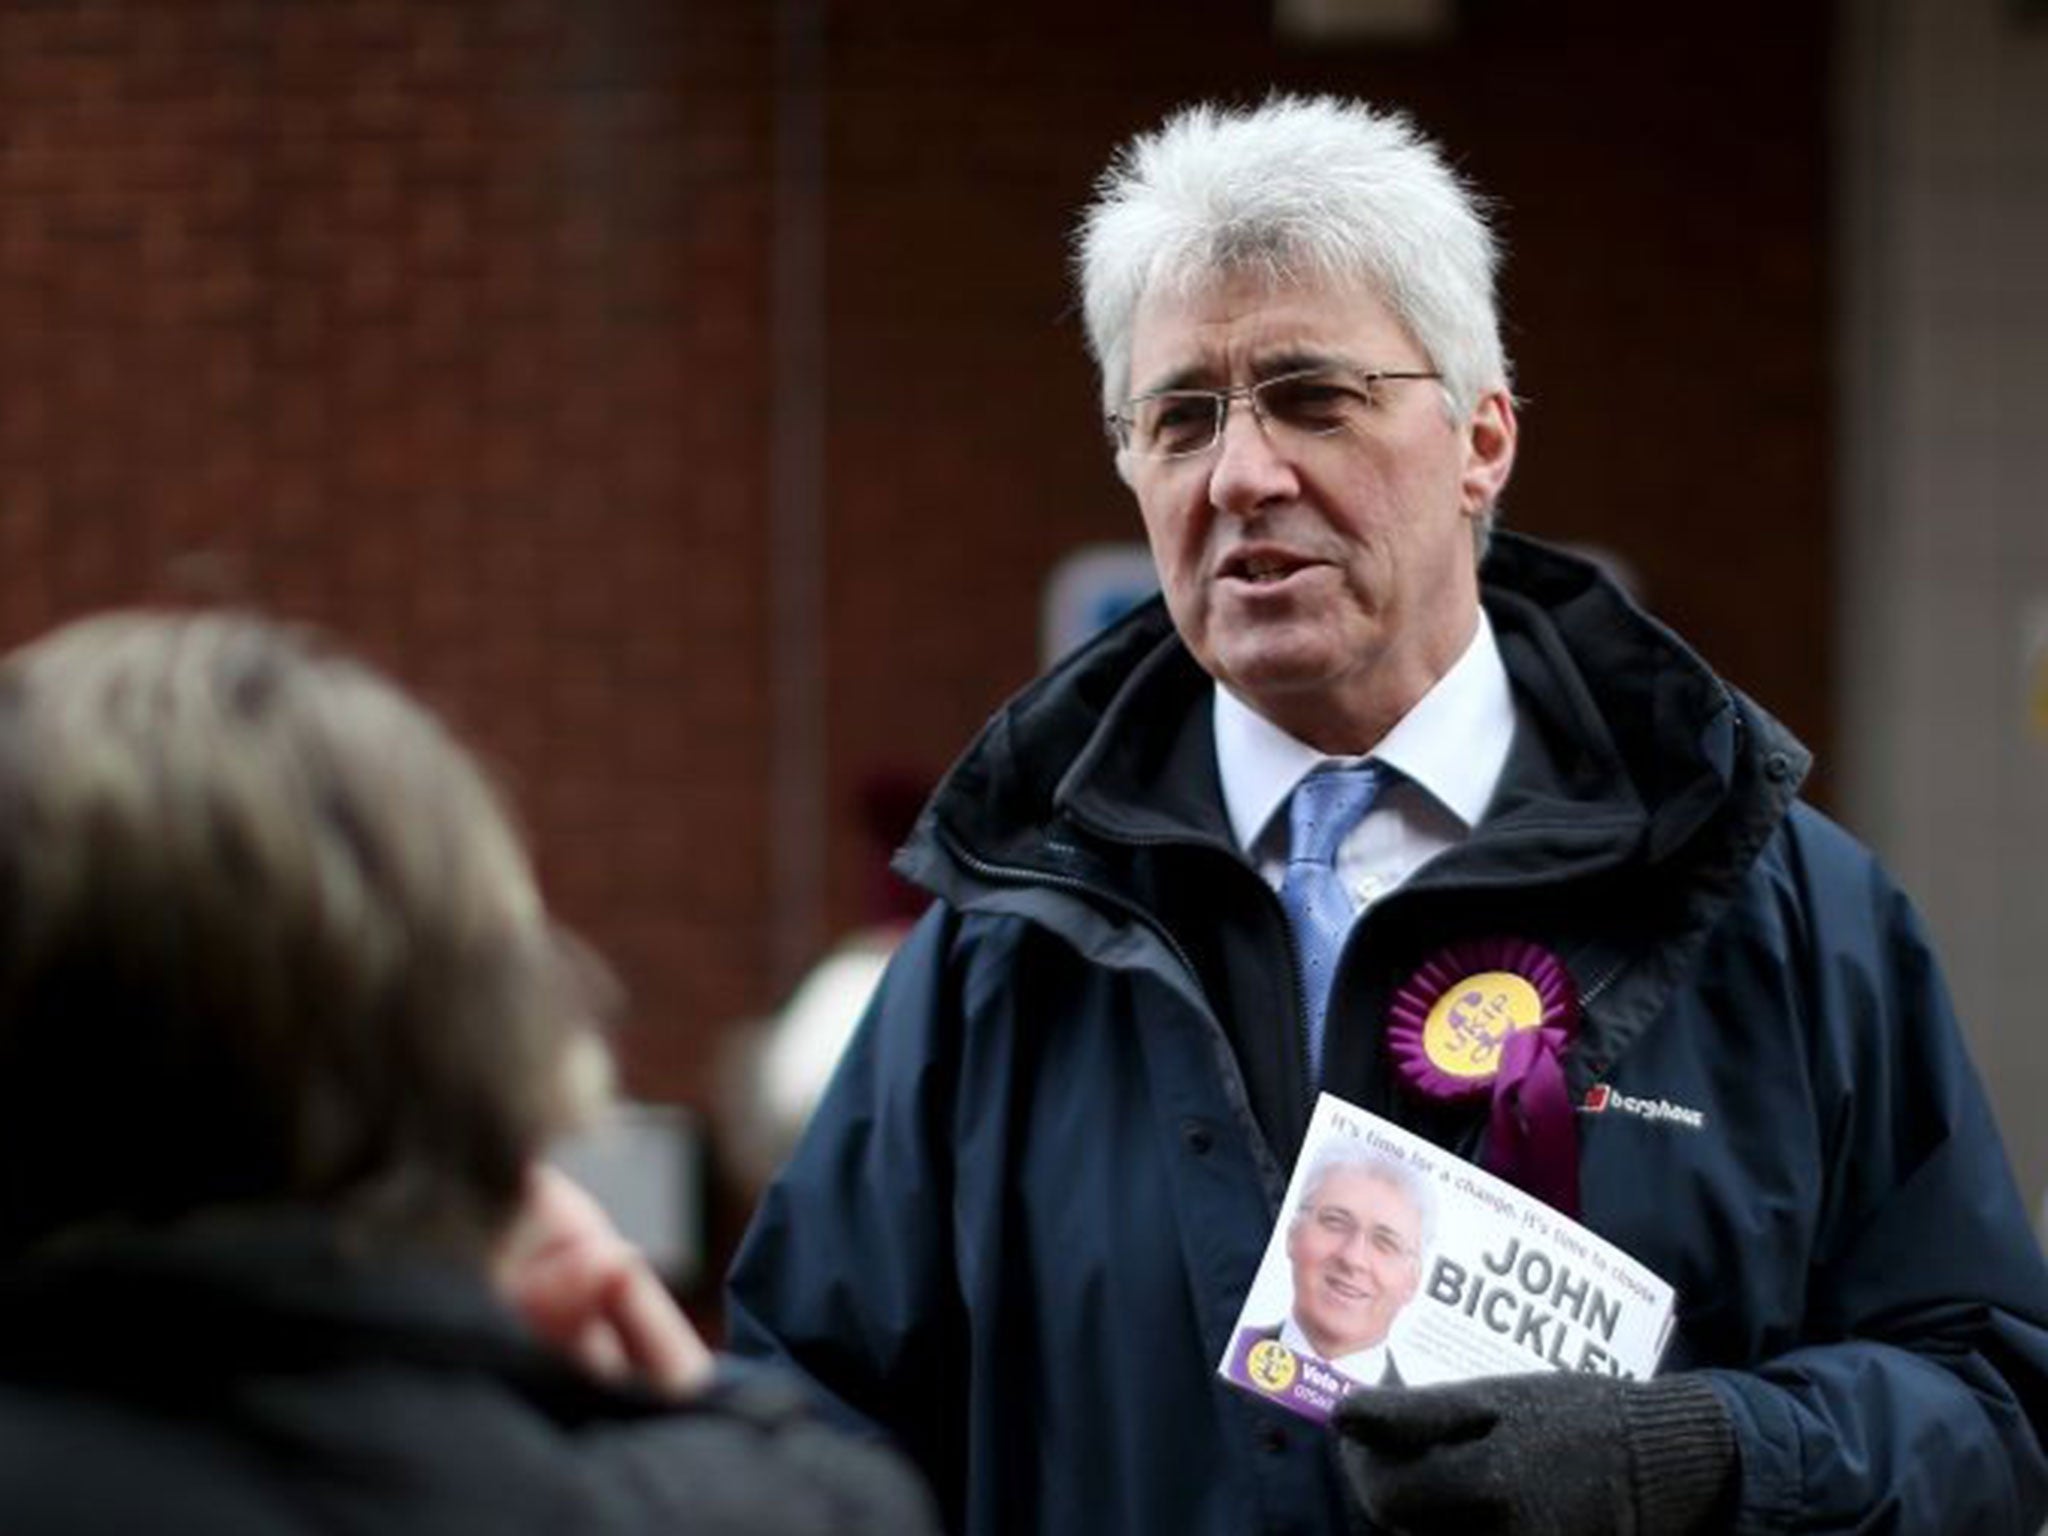 Ukip's John Bickley finished as runner-up in the Wythenshawe and Sale East parliamentary by-election